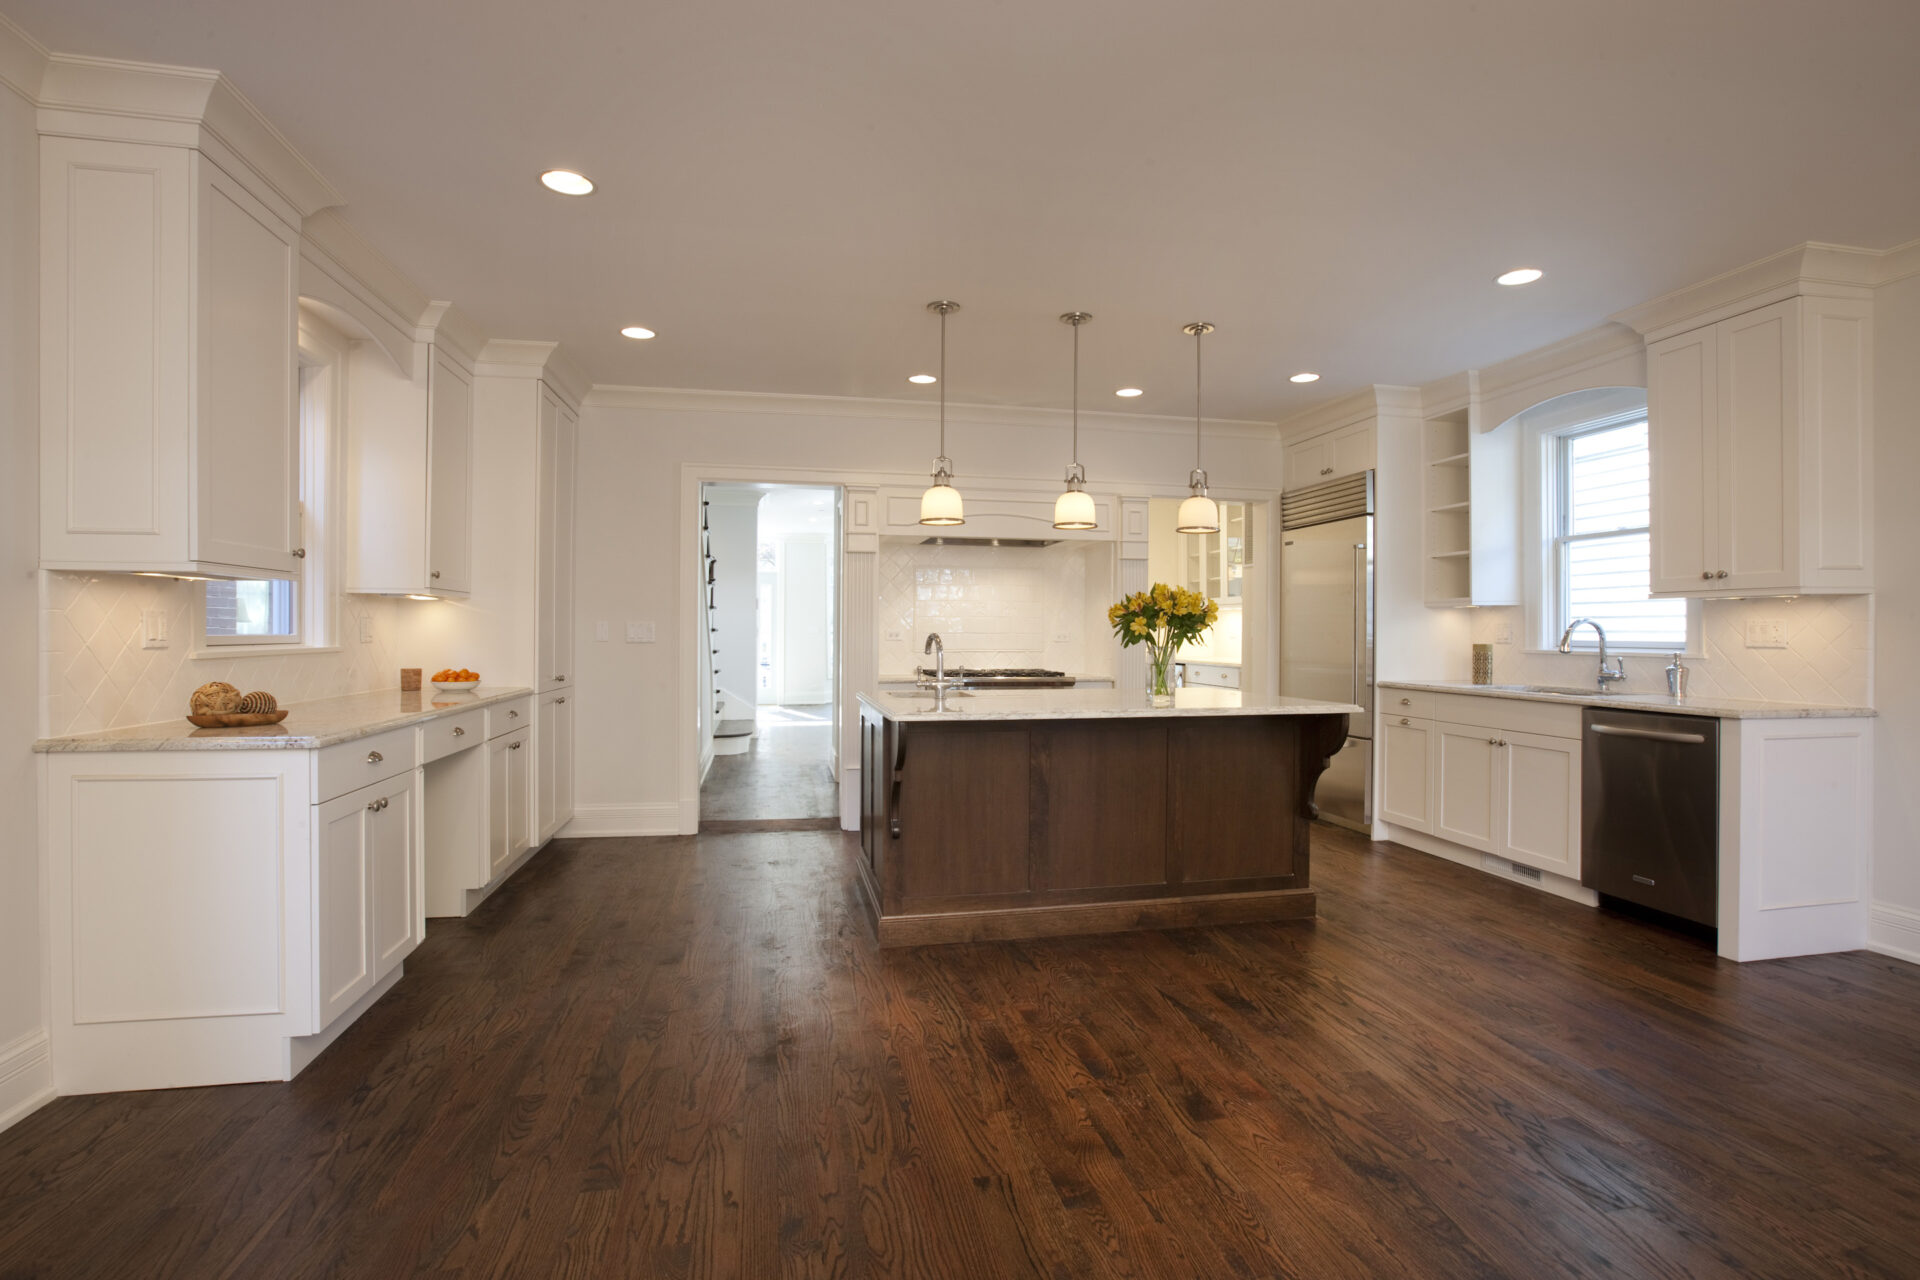 Spacious kitchen space with wooden flooring and white walls and features